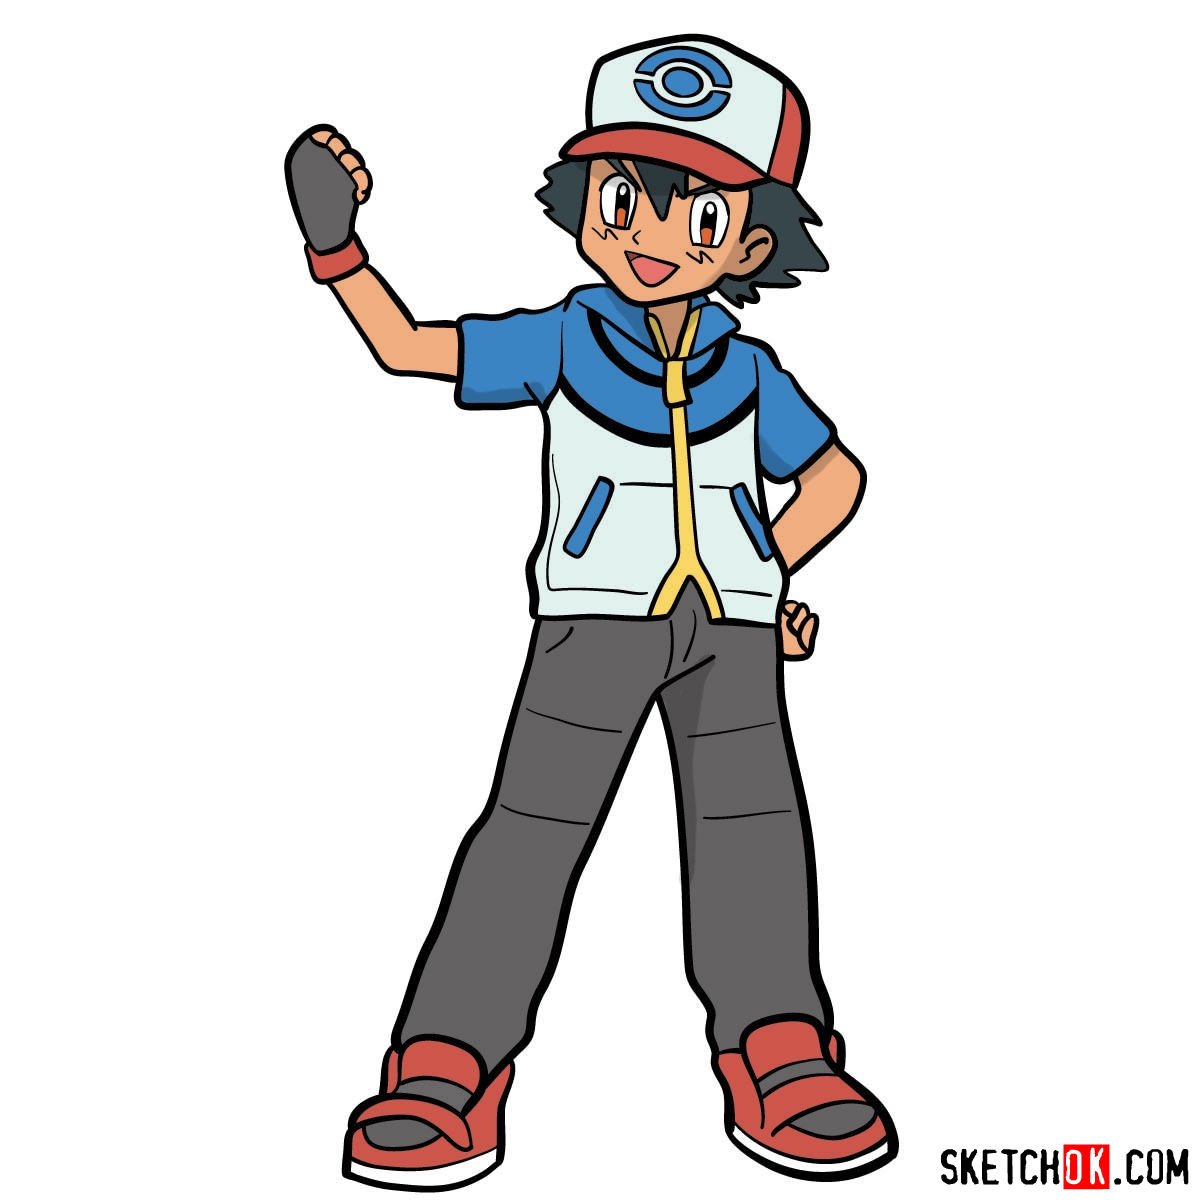 How to draw Ash from Pokemon anime - Sketchok easy drawing guides